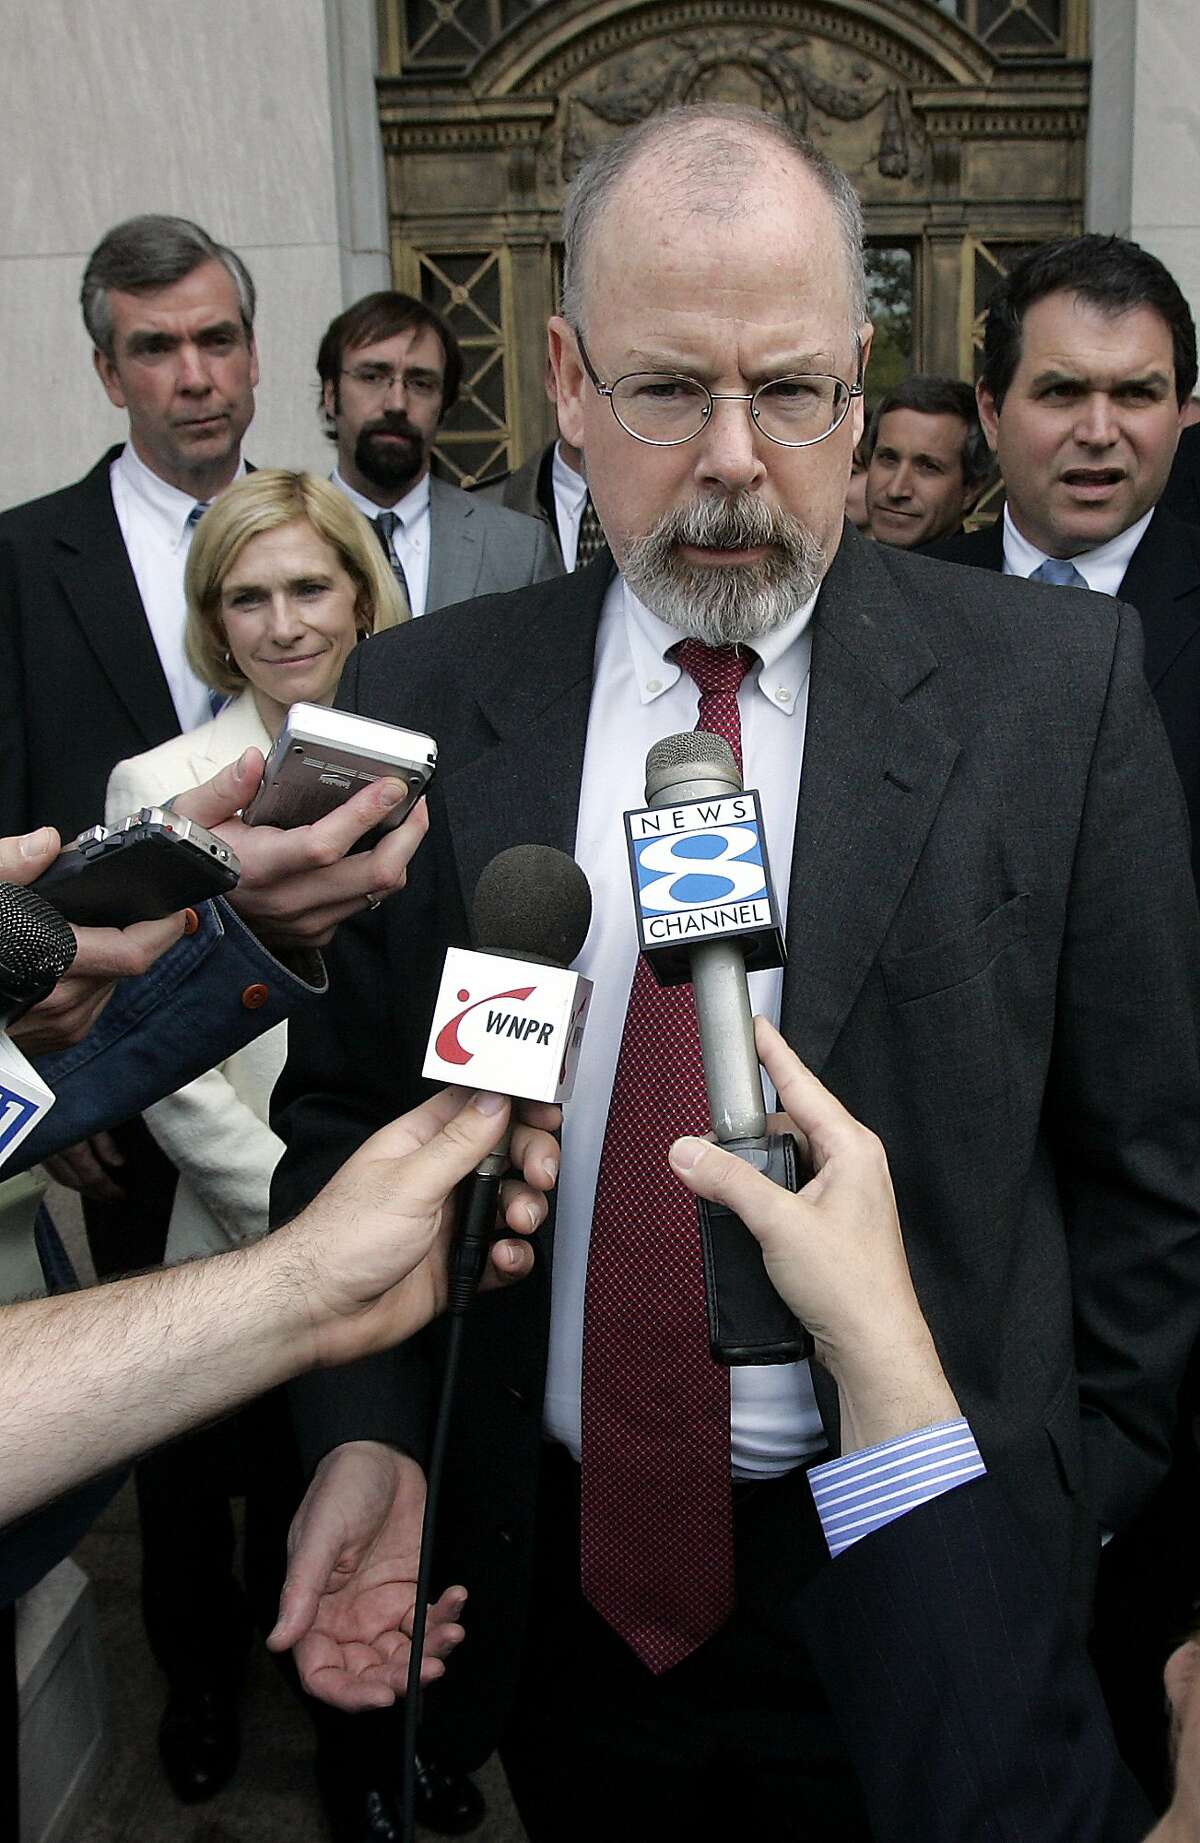 John Durham, a federal prosecutor in Connecticut, speaks to reporters on the steps of U.S. District Court in New Haven, Conn. in this April 25, 2006 file photo. Durham has been chosen by Attorney General Michael Mukasey to oversee the destruction of CIA interrogation videotapes case. (AP Photo/Bob Child, File)